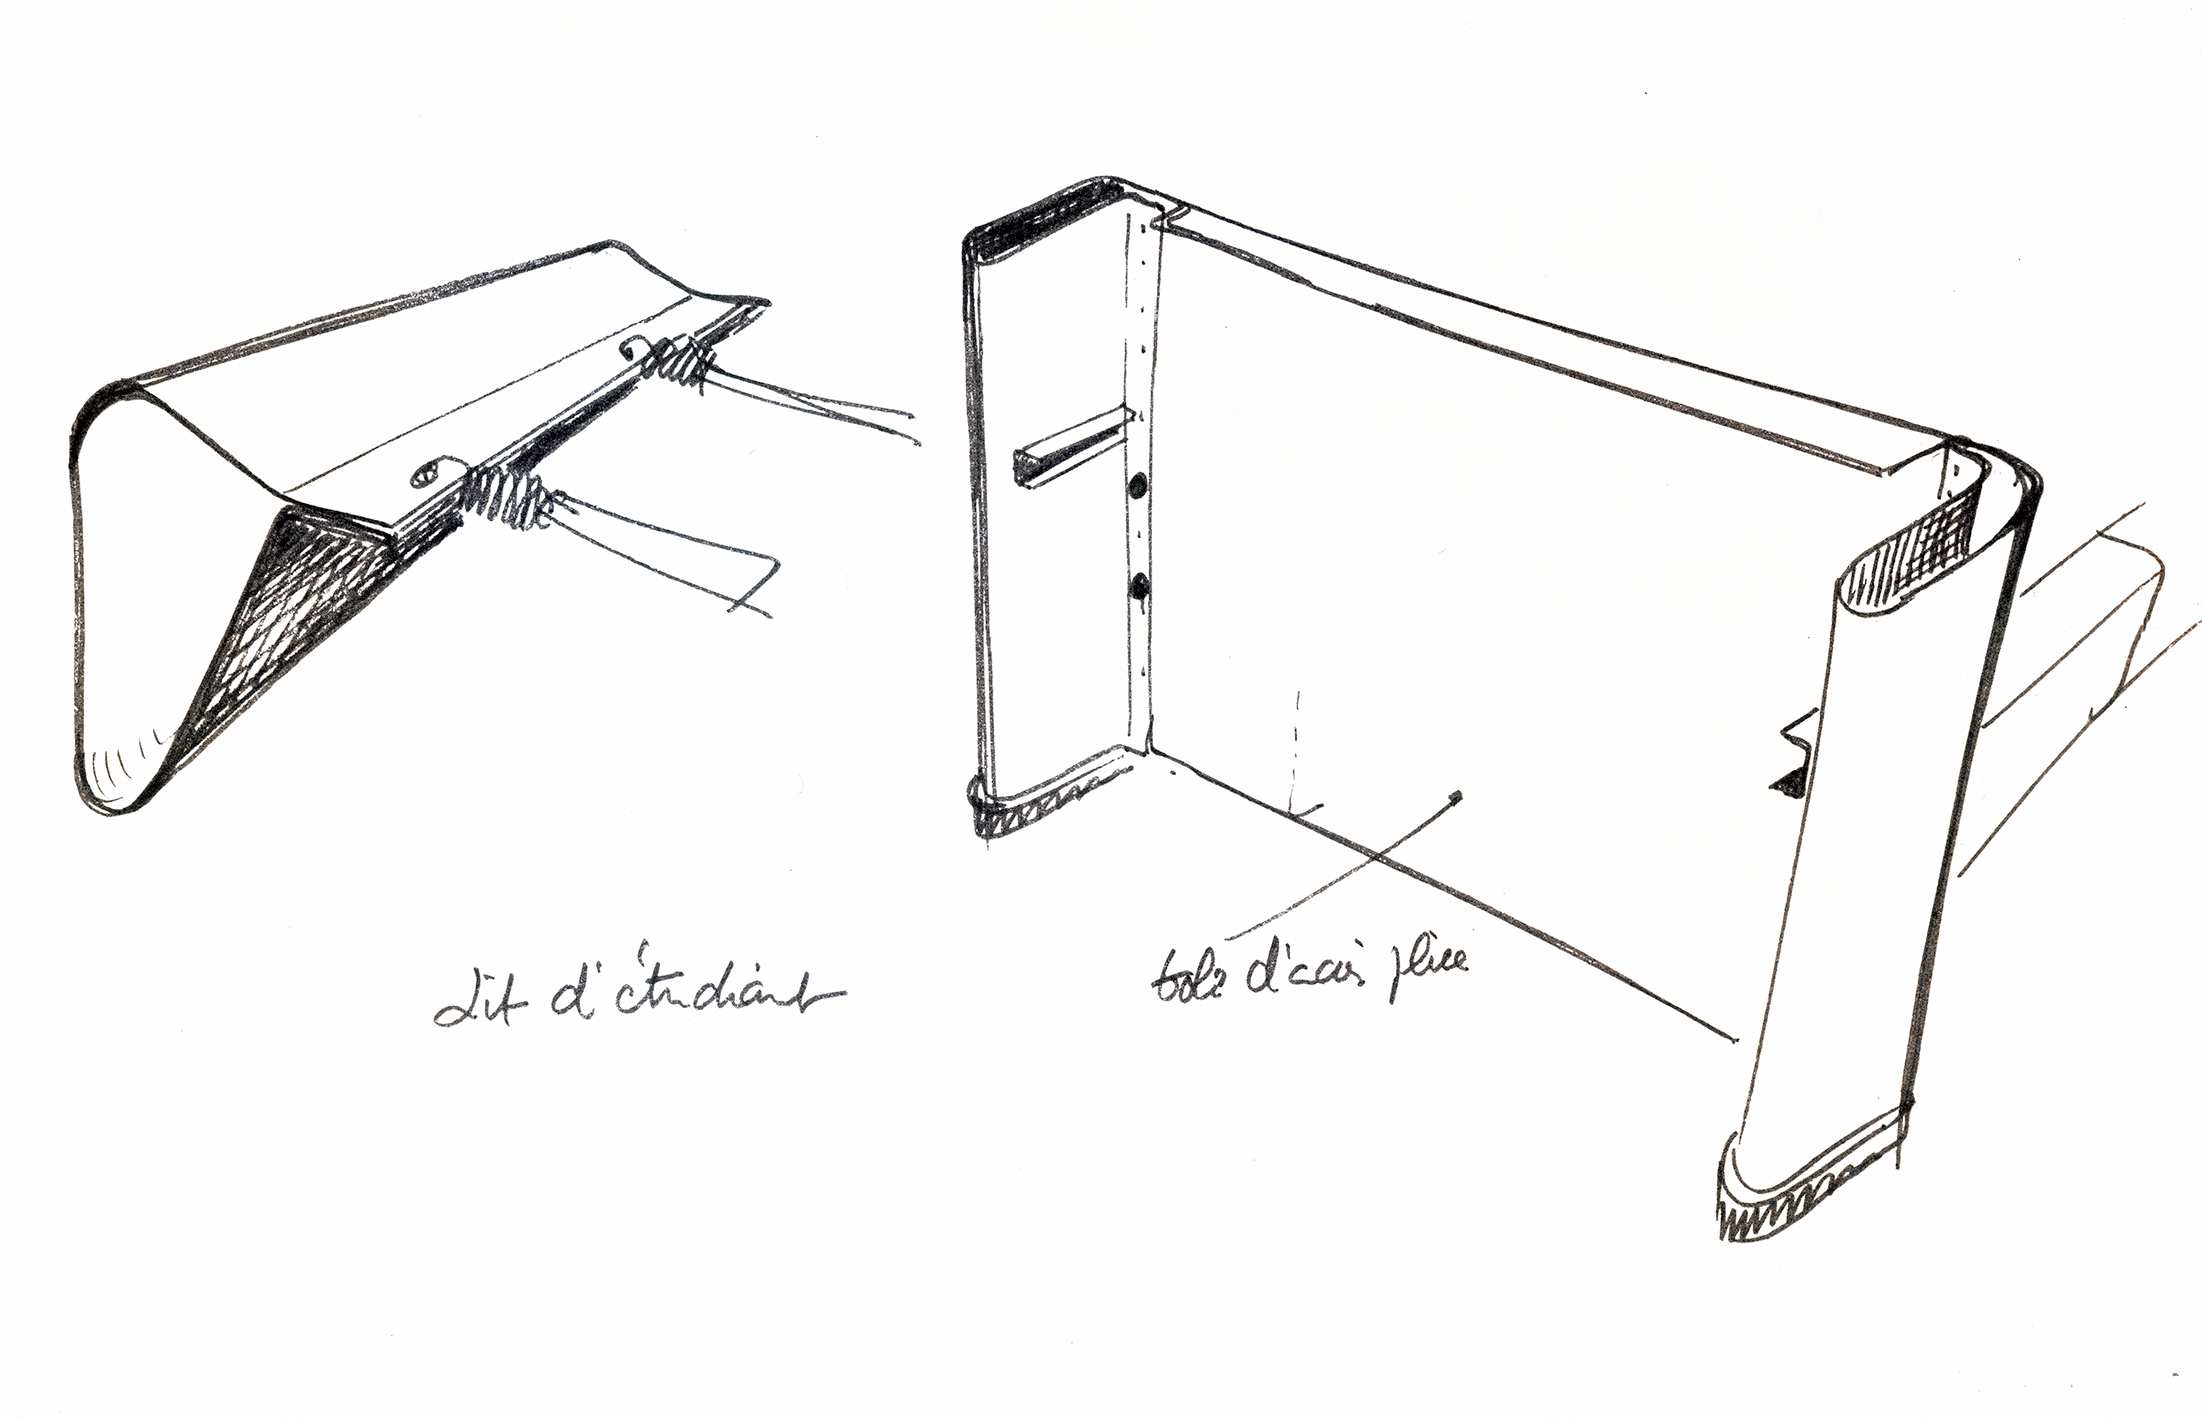 “Lit d’étudiant” (Student bed). Detail of the runner and bent steel box frame. Sketch by Jean Prouvé for the magazine Intérieur, 1965.